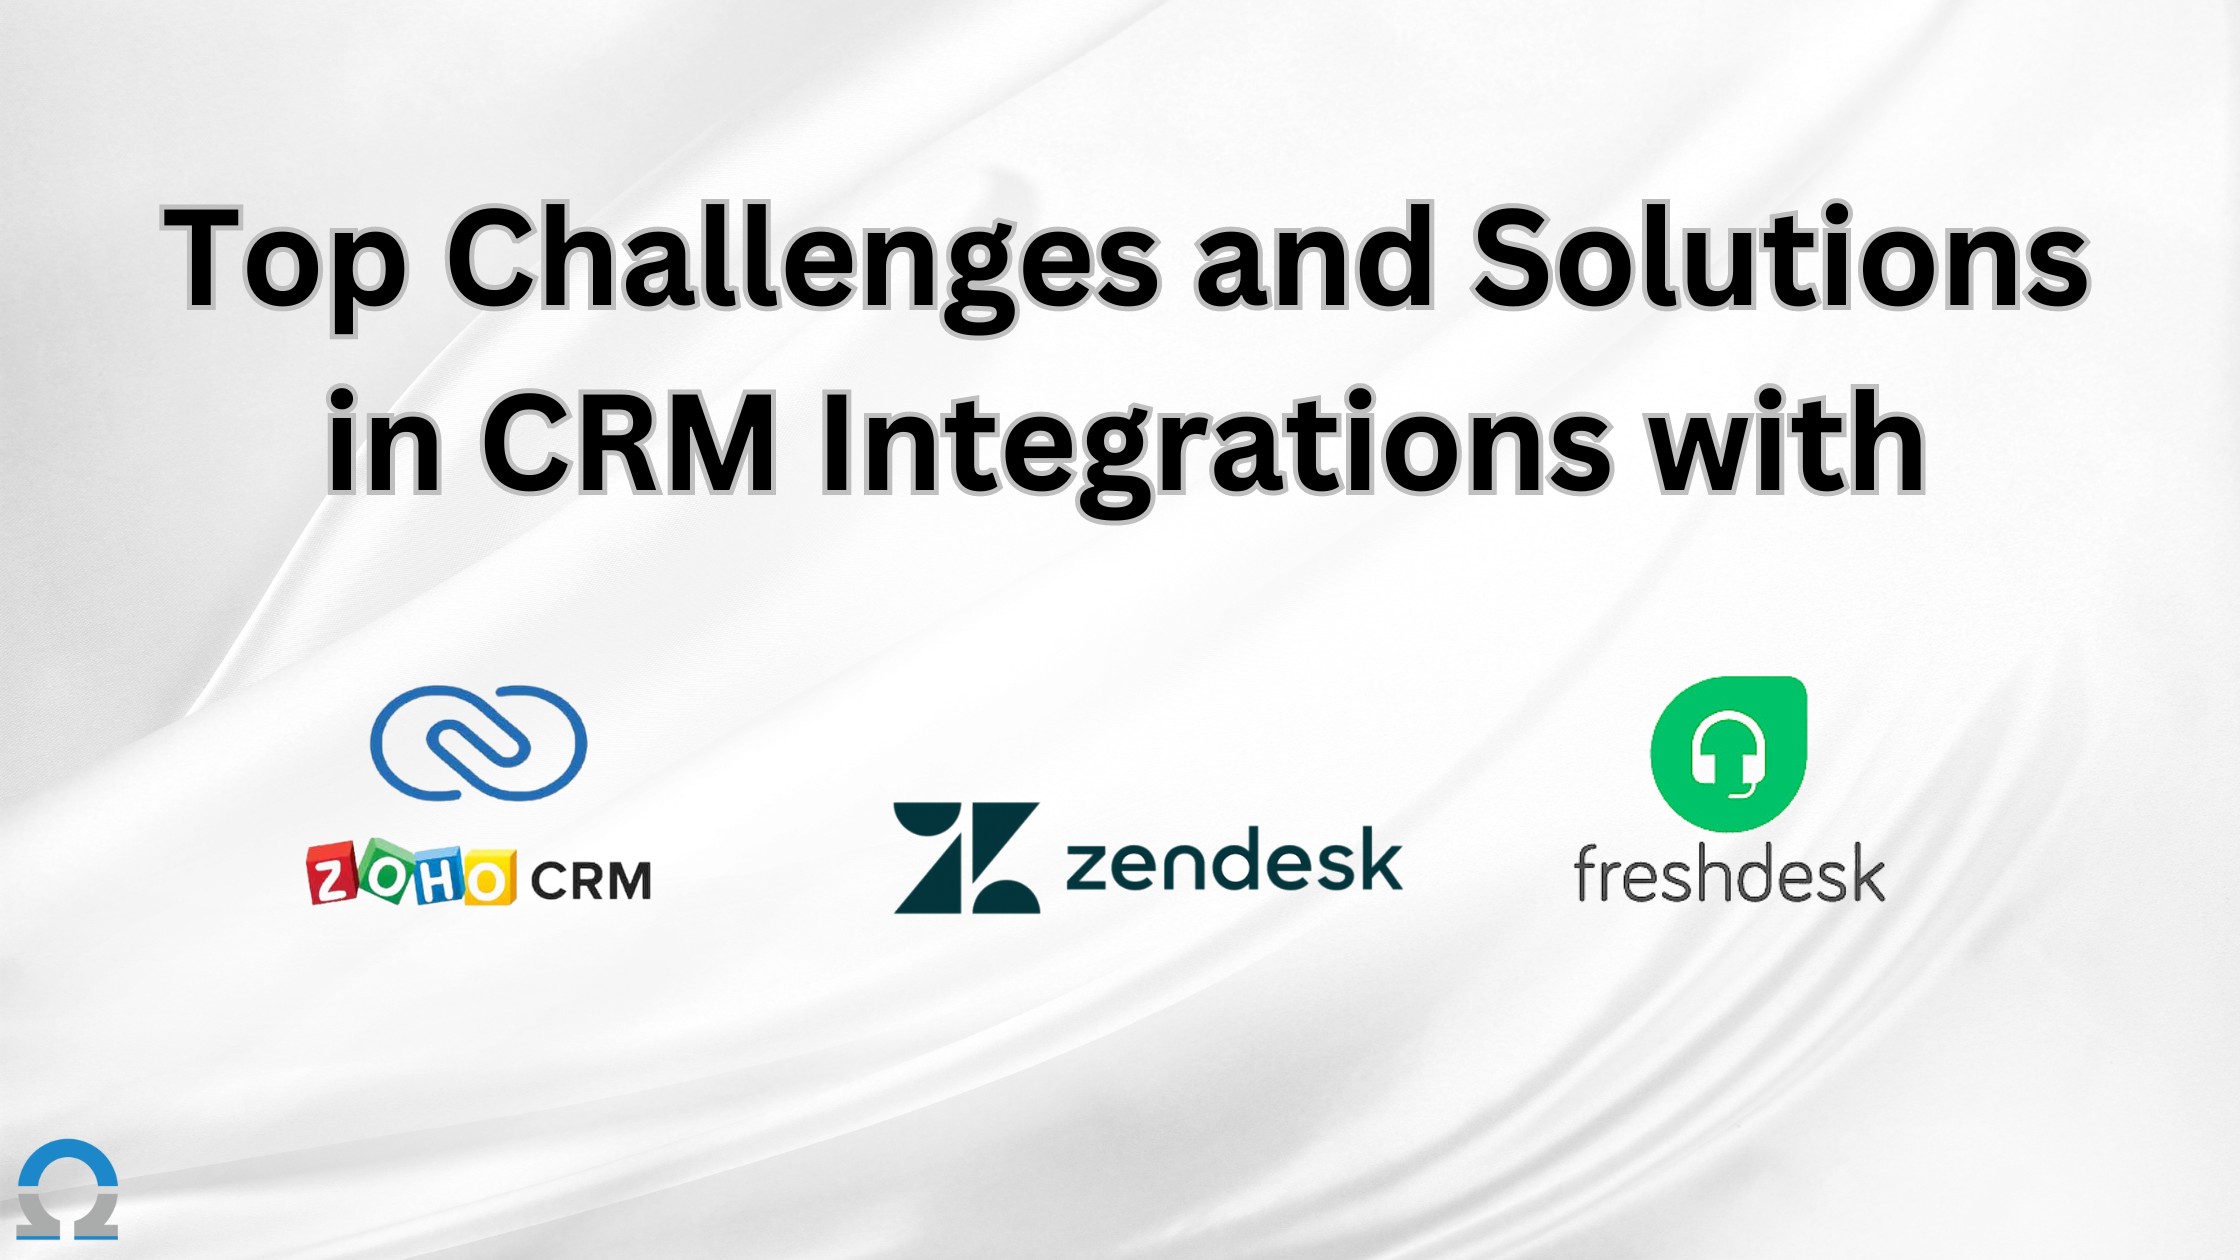 Top Challenges and Solutions in CRM Integrations with
                      Zoho, Freshdesk, and Zendesk
                    